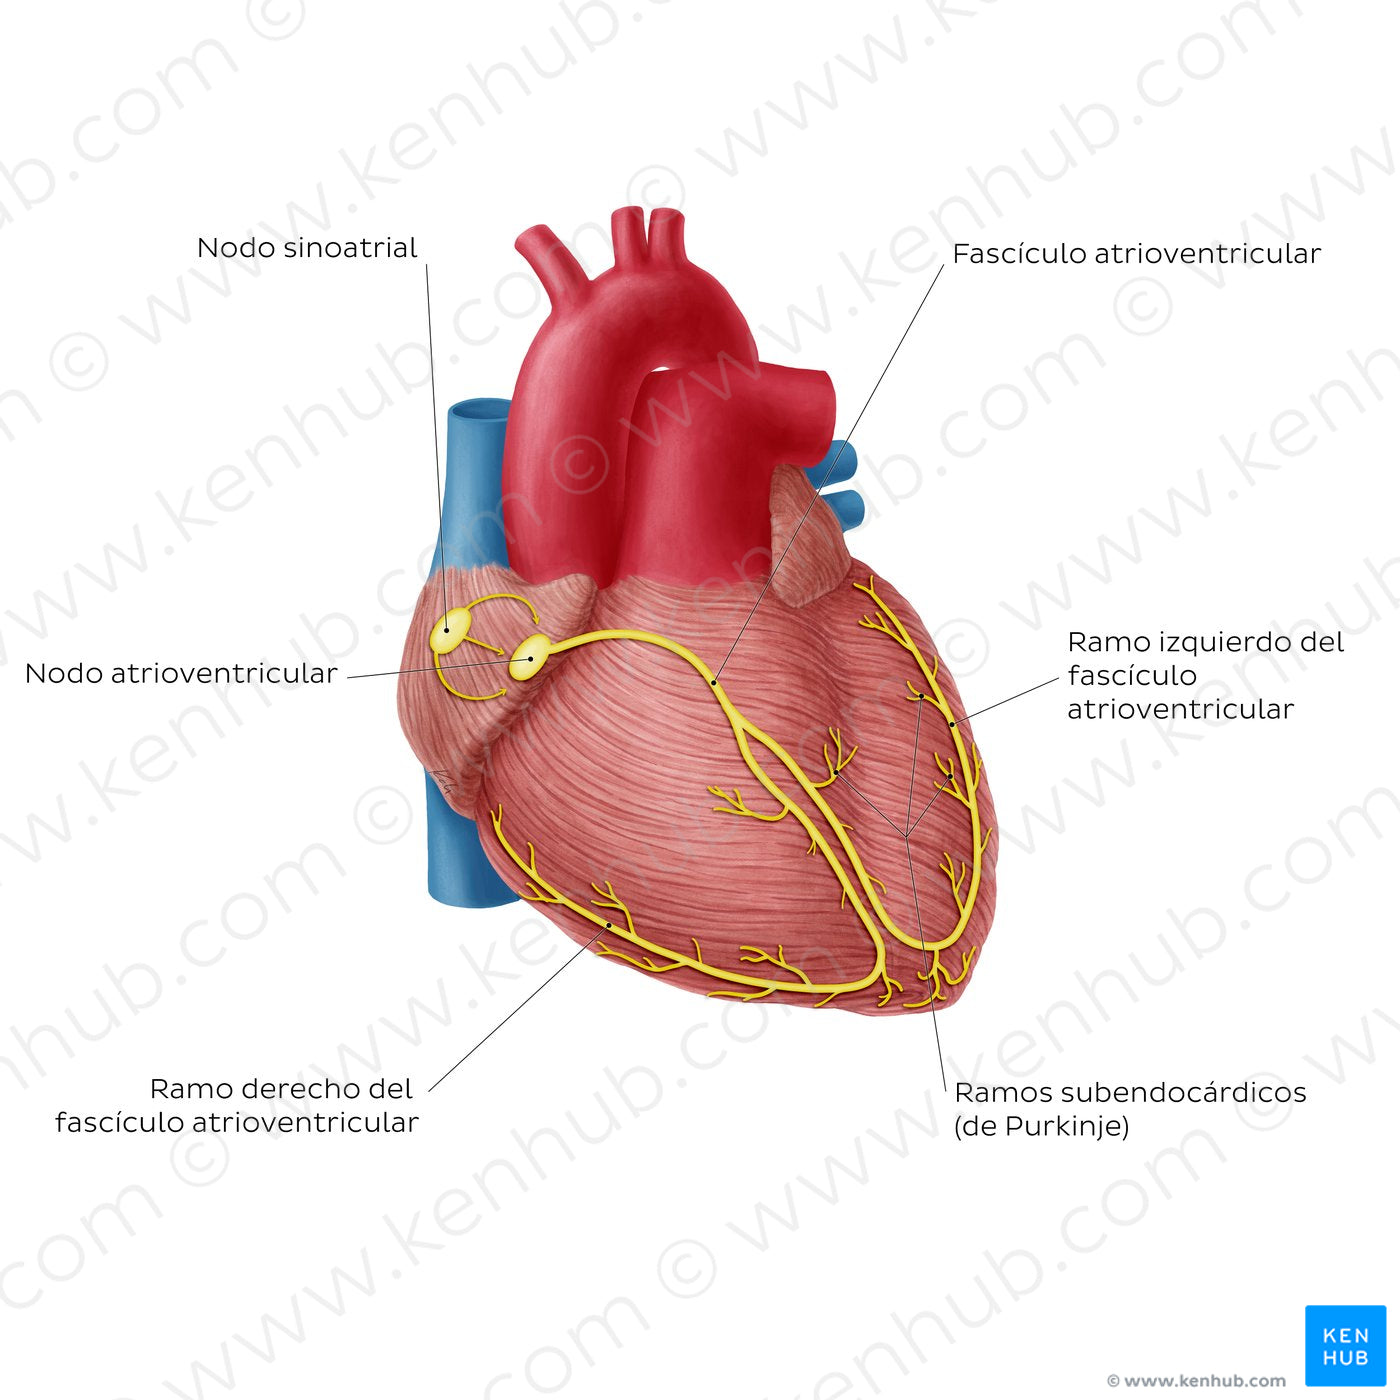 Conduction system of the heart (Spanish)